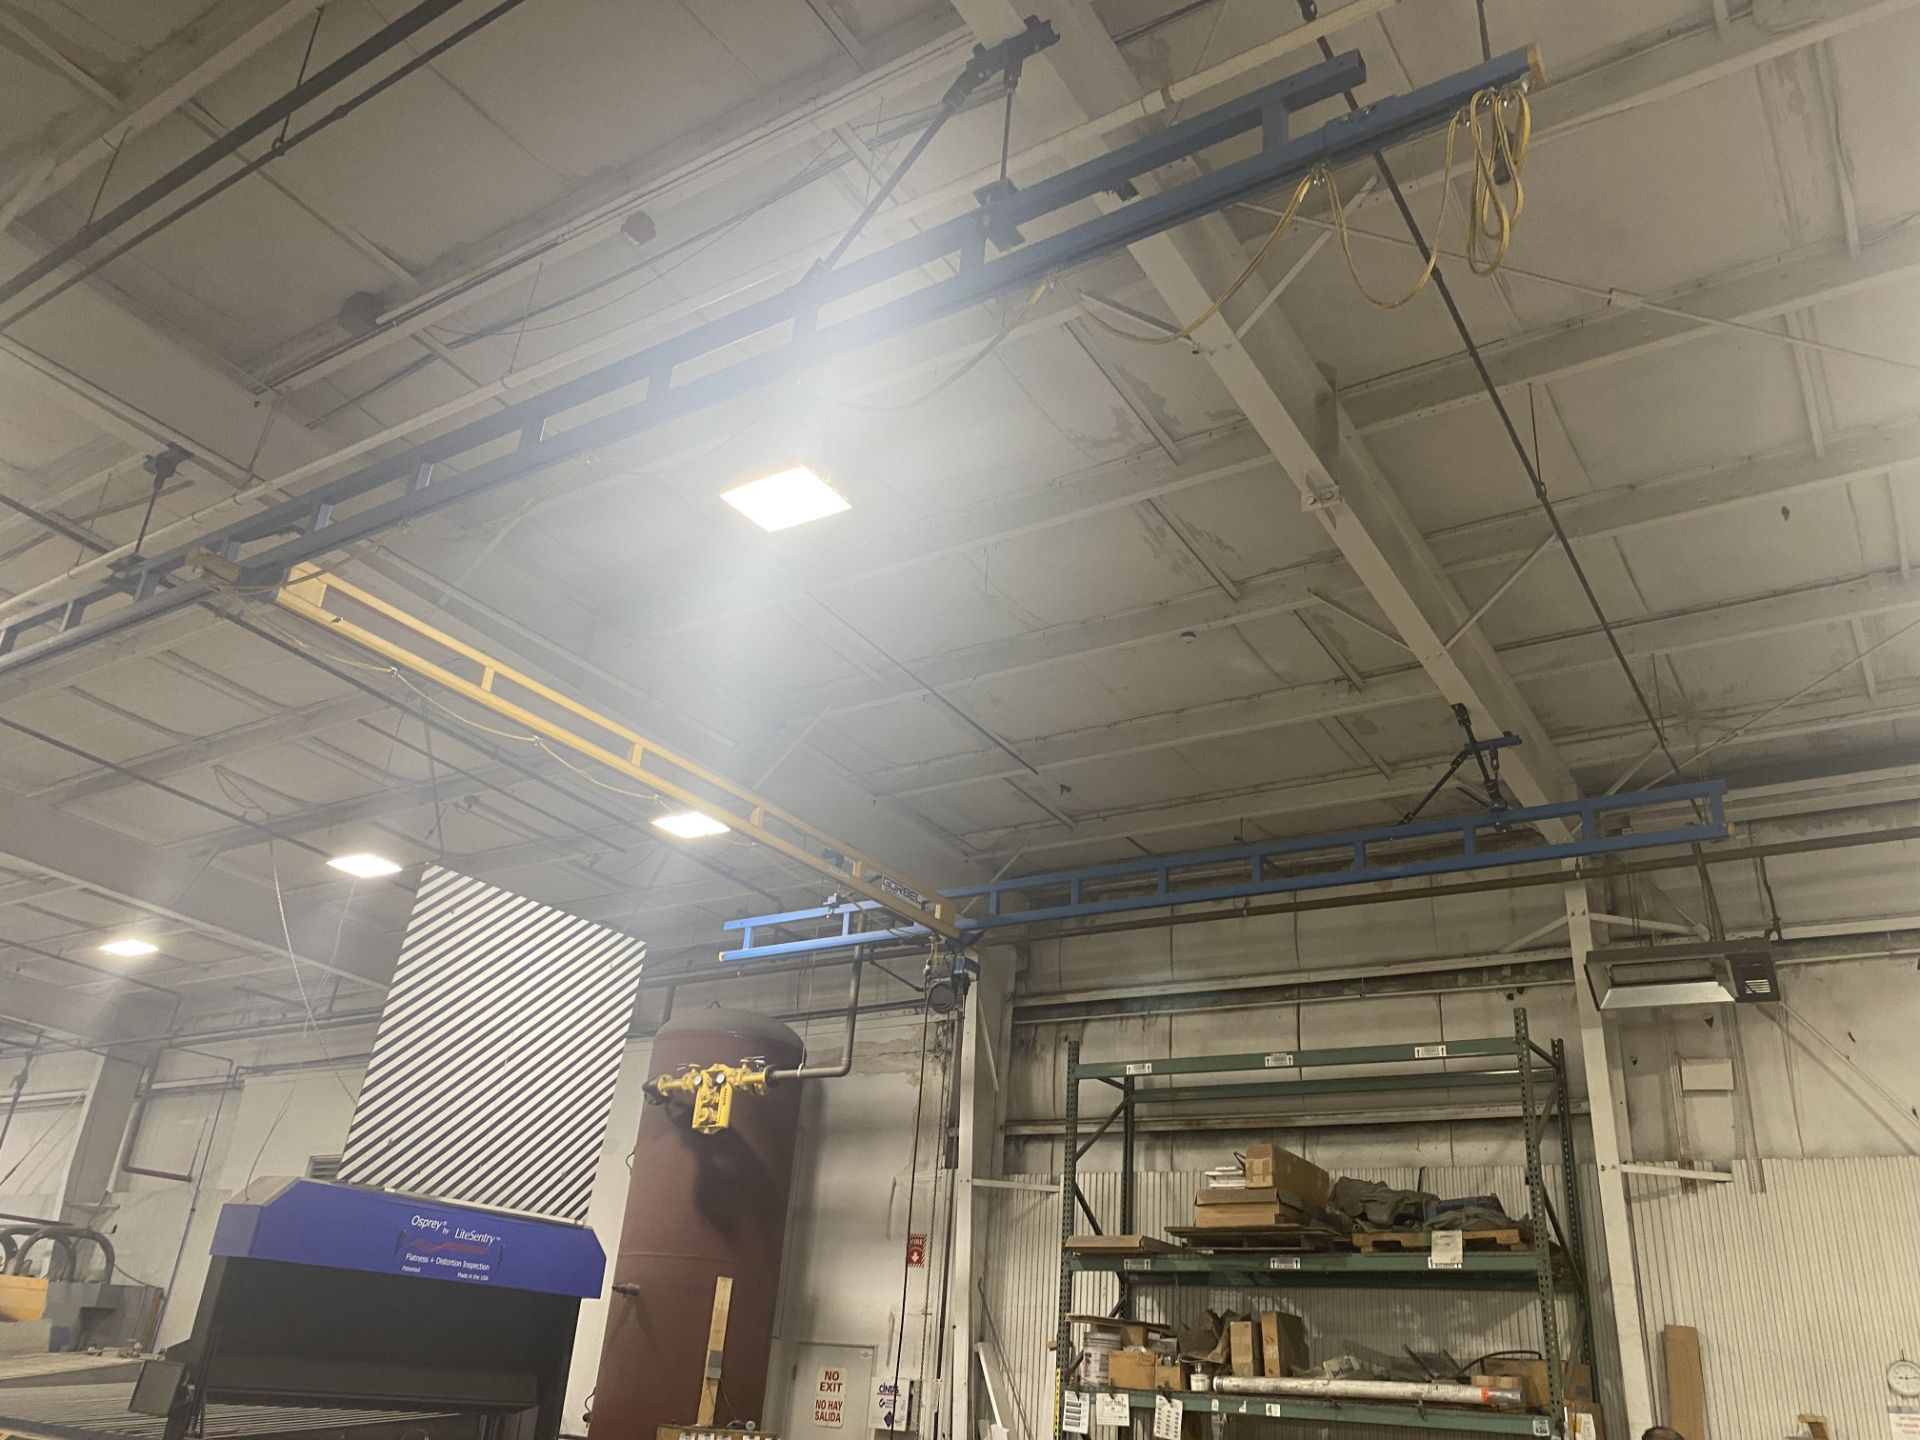 Gorbel 1,000# Overhead Crane Structure Approx. 20' Span, Approx. 24' Rails, Demag 1,100# Electric